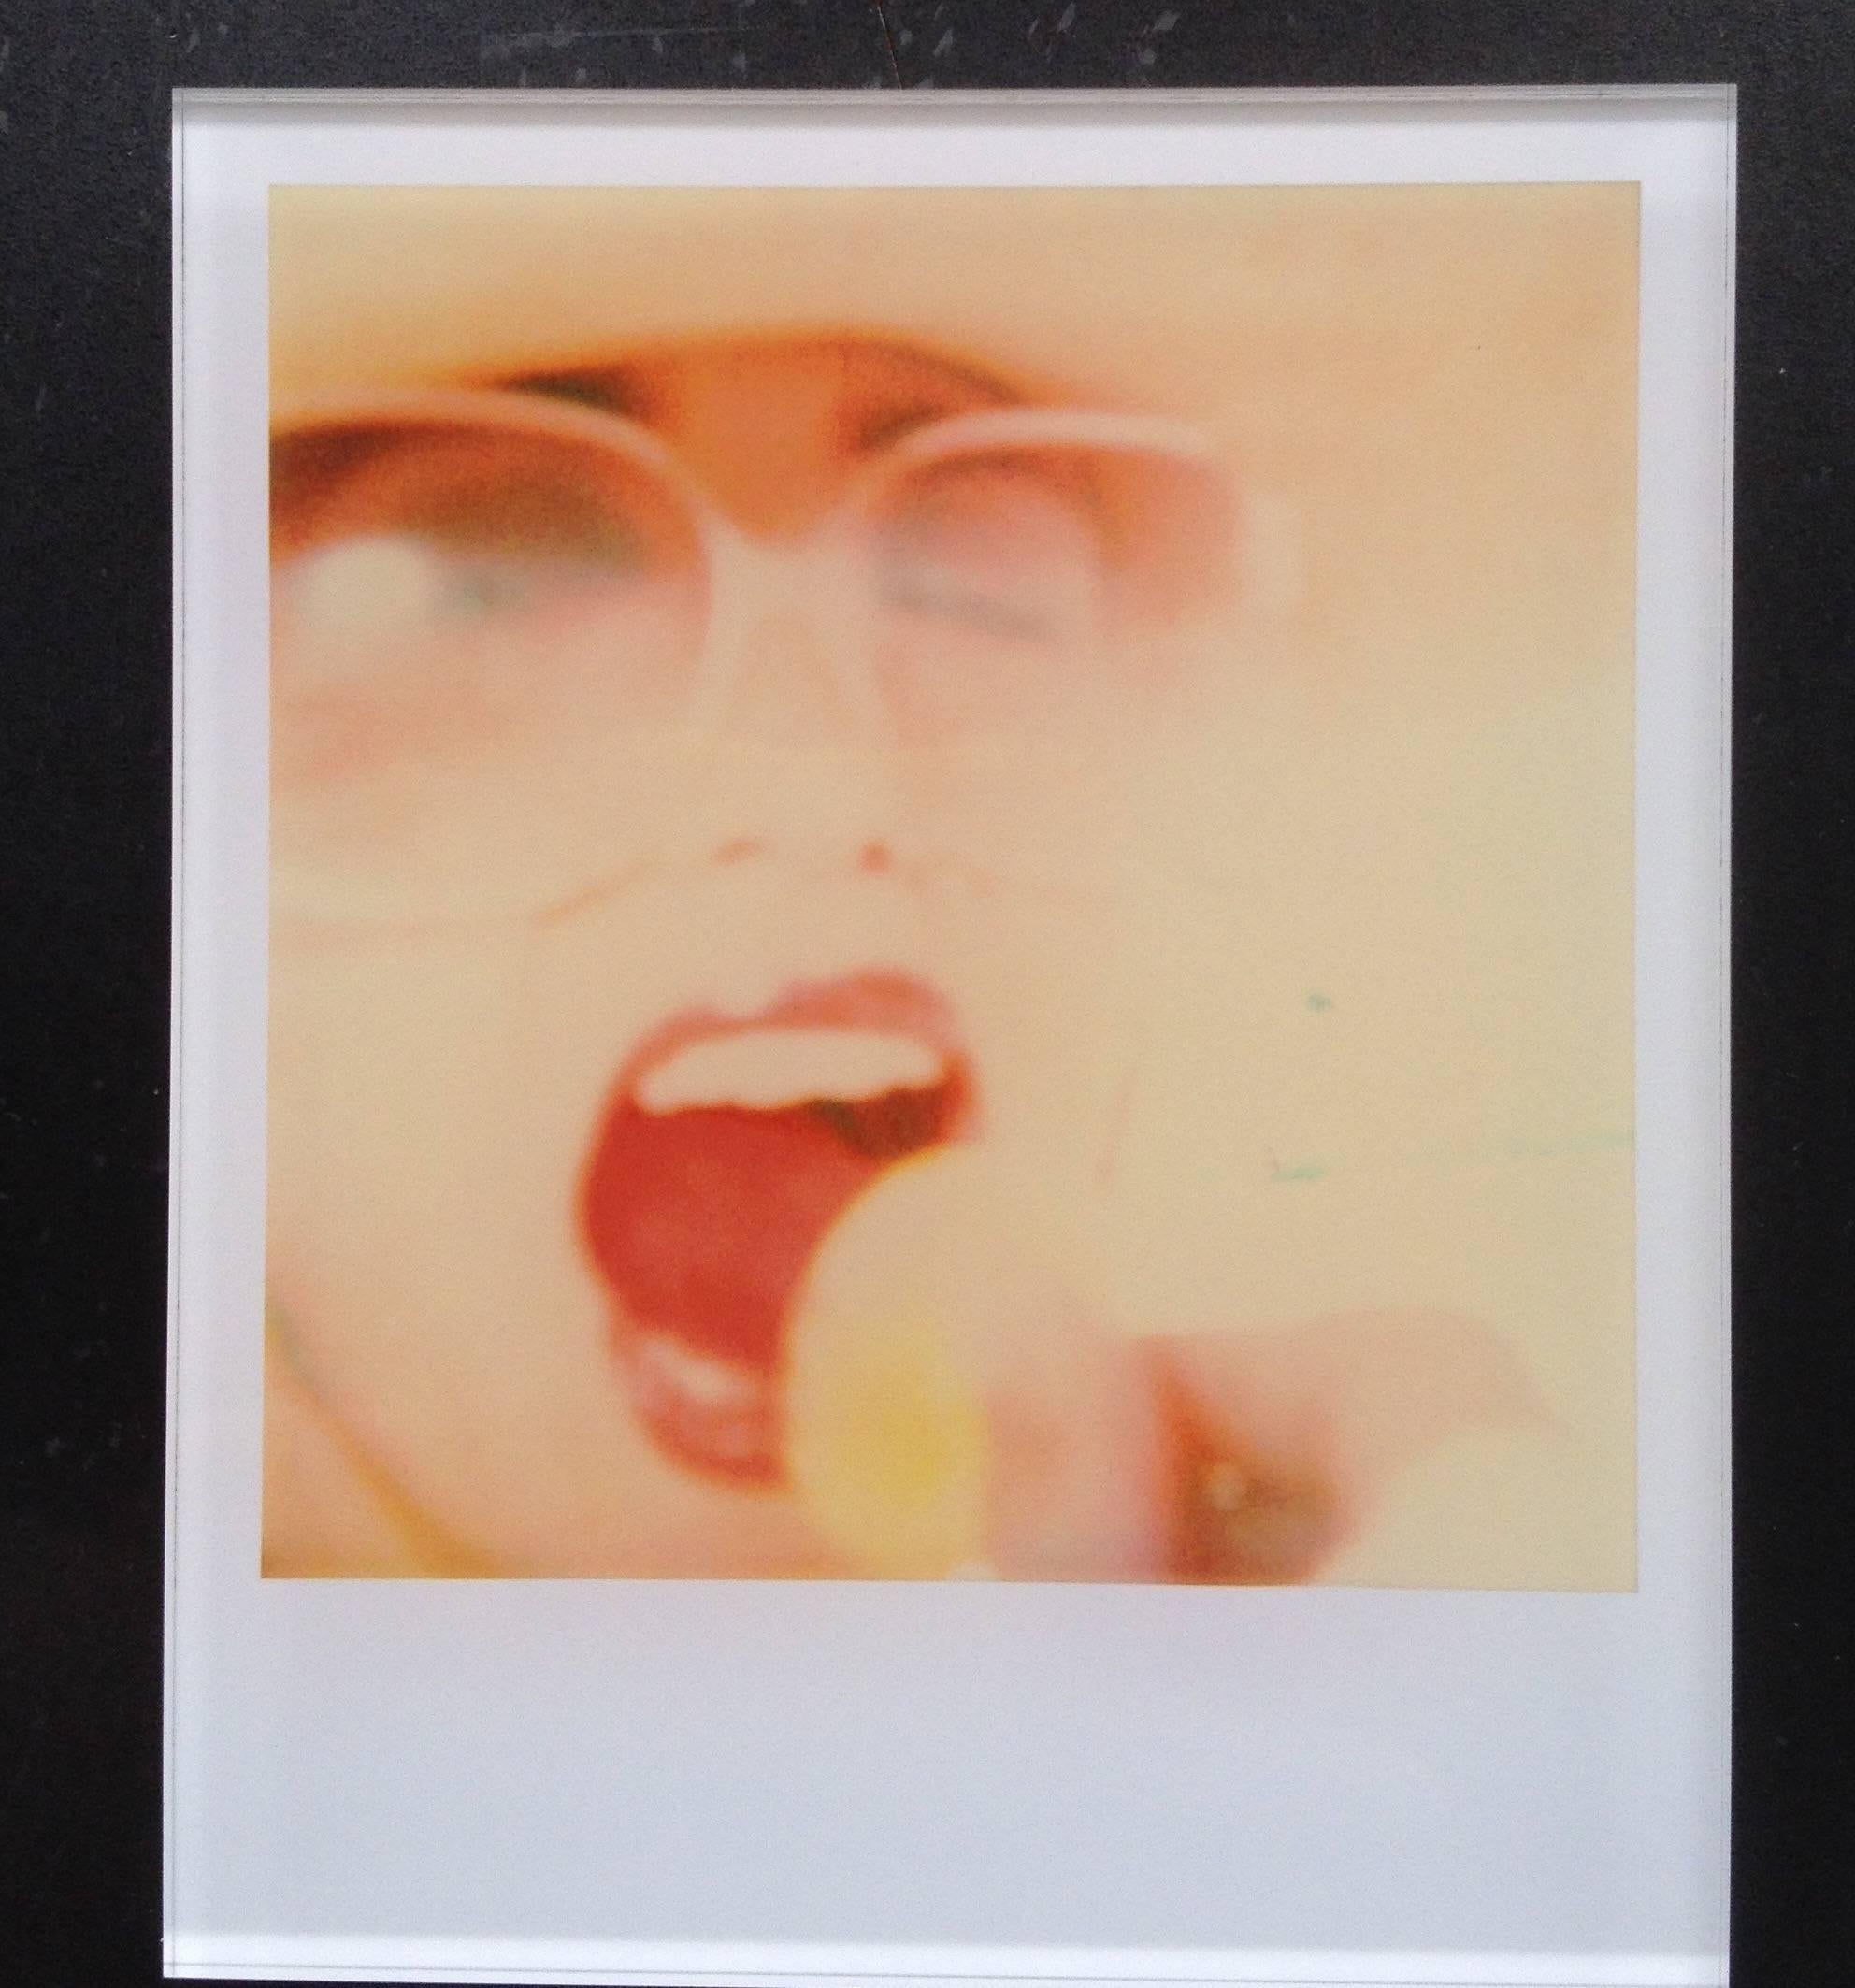 Stefanie Schneider's Minis
'Lollipop' (Beachshoot) featuring Radha Mitchell, 2005
signed and signature brand on verso
Lambda digital Color Photographs based on a Polaroid

Polaroid sized open Editions 1999-2013
10.7 x 8.8cm (Image